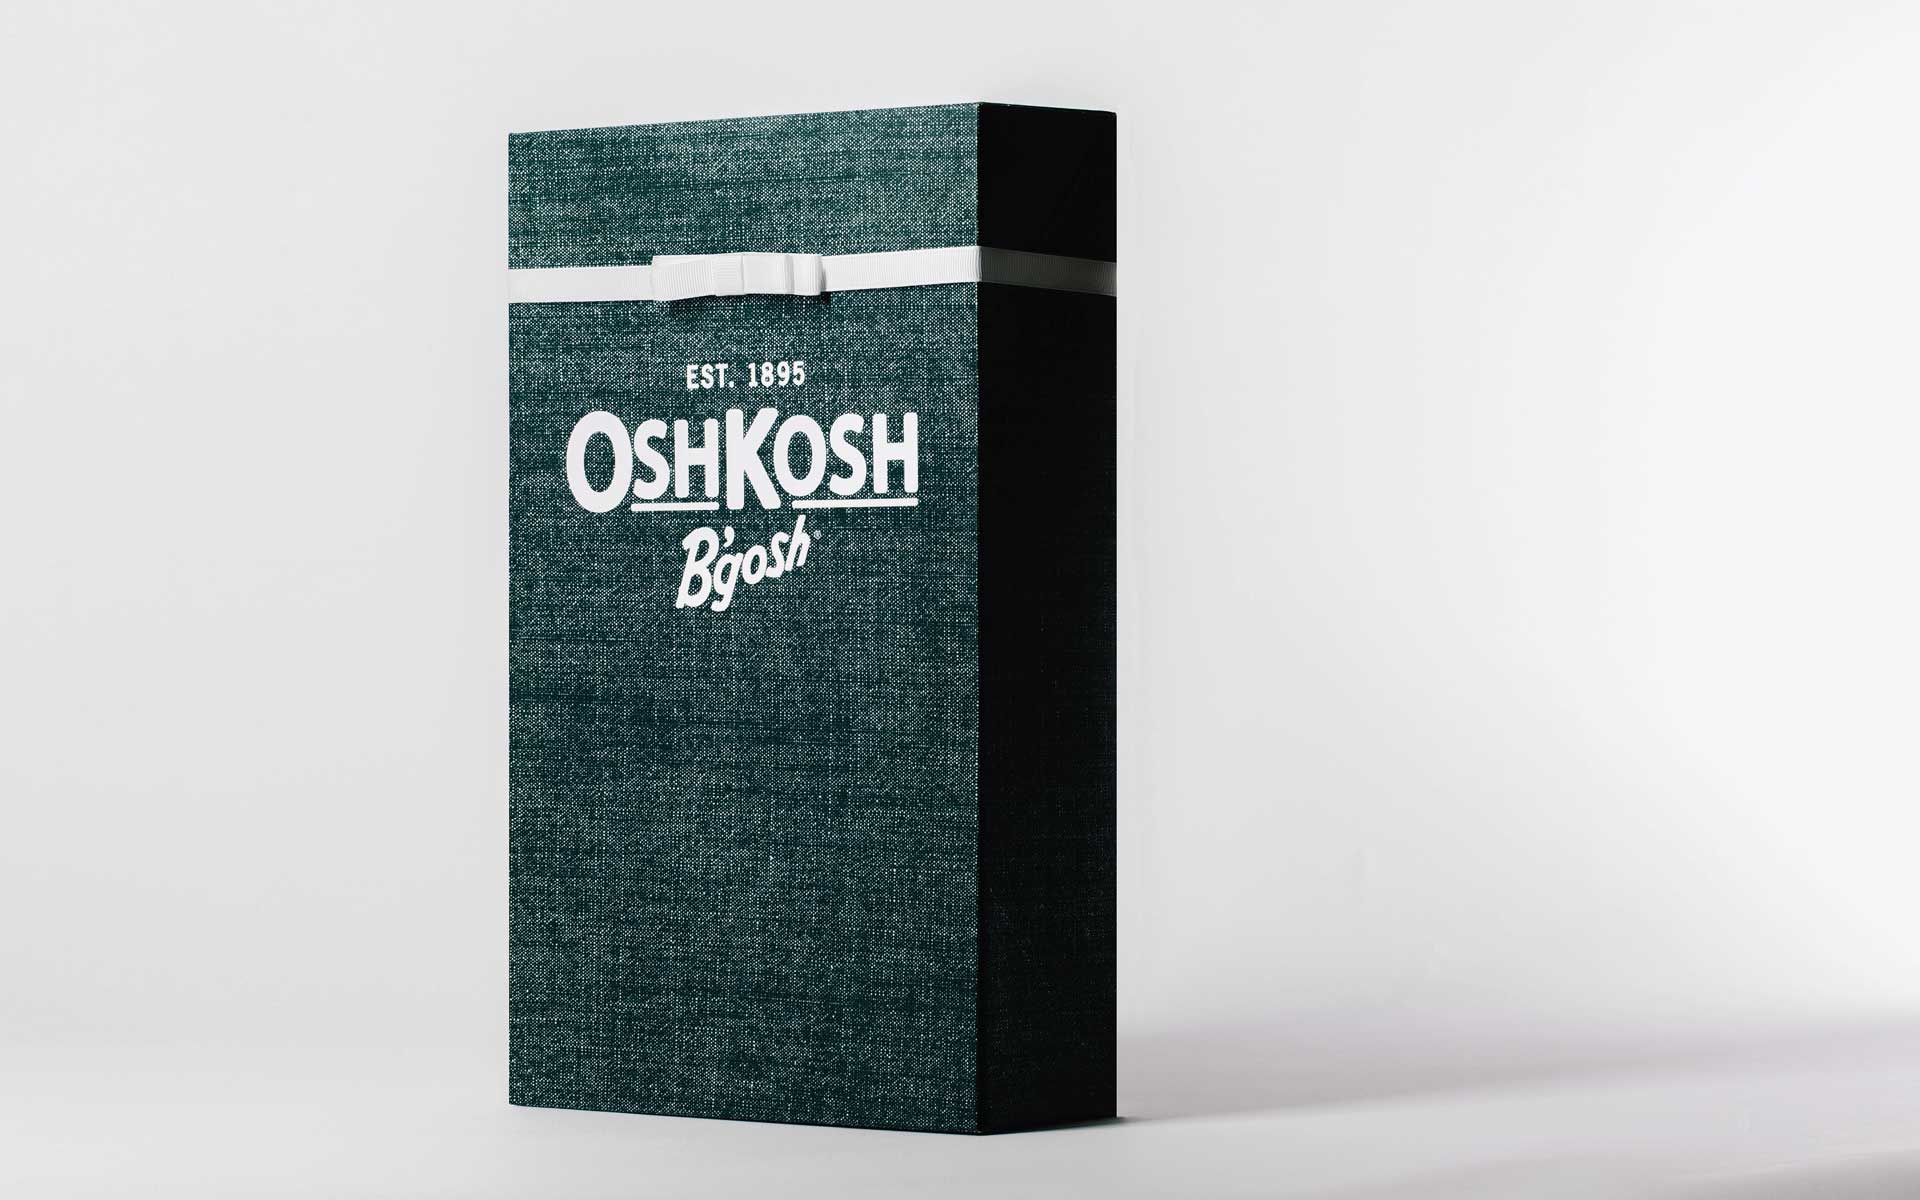 Creative package design for OshKosh B'gosh by Creative Retail Packaging